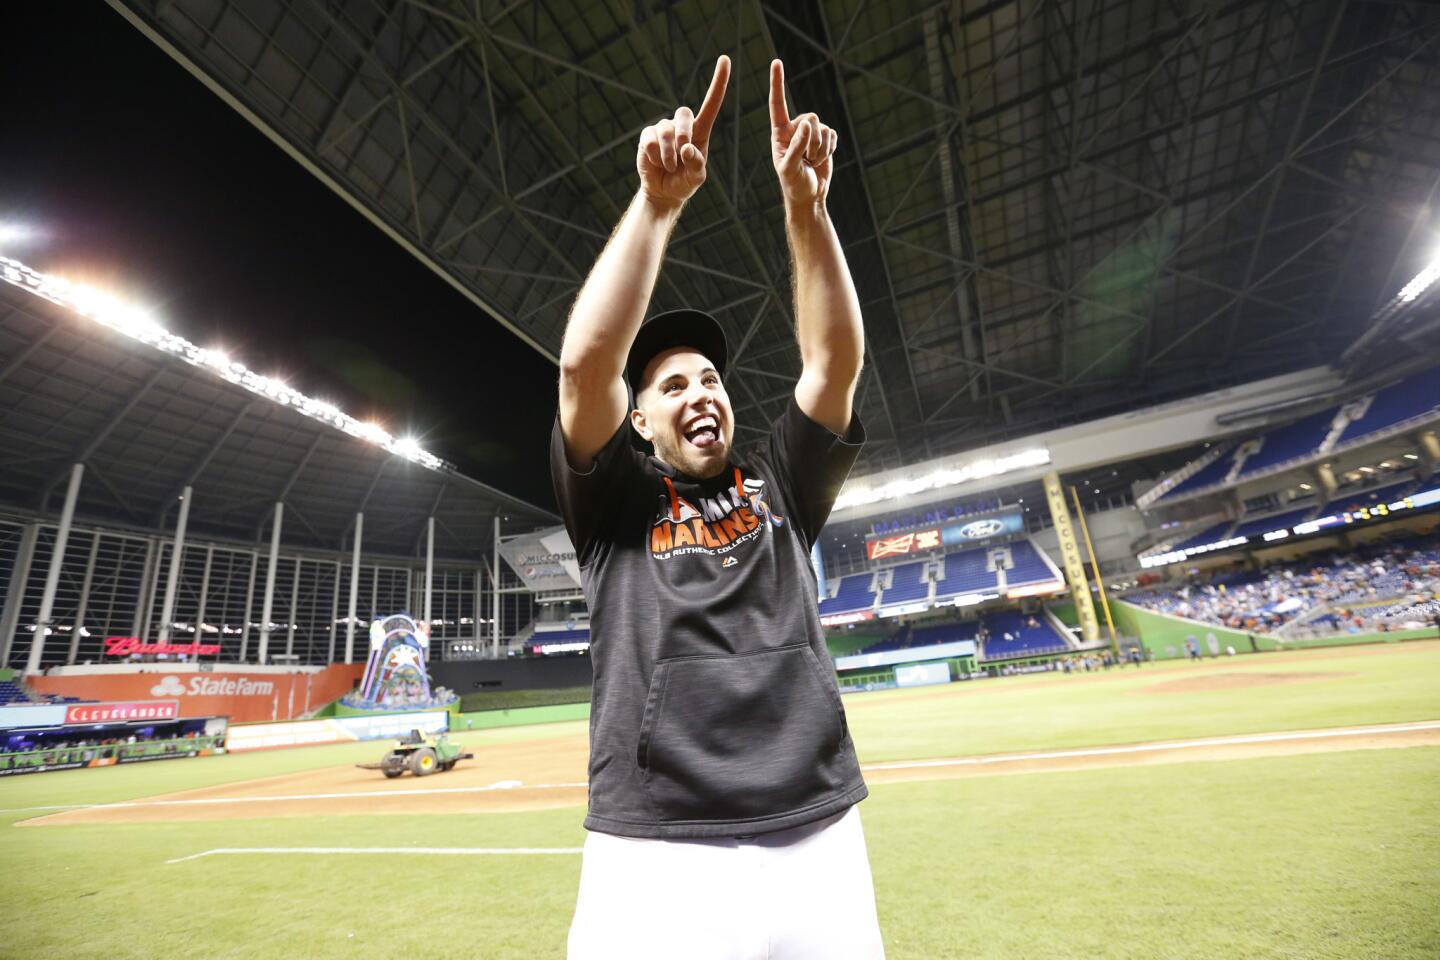 Miami Marlins starting pitcher Jose Fernandez gestures to the stands after the Marlins defeated the Los Angeles Dodgers in a baseball game, Friday, Sept. 9, 2016, in Miami. Fernandez tied a career high with 14 strikeouts. (AP Photo/Wilfredo Lee)